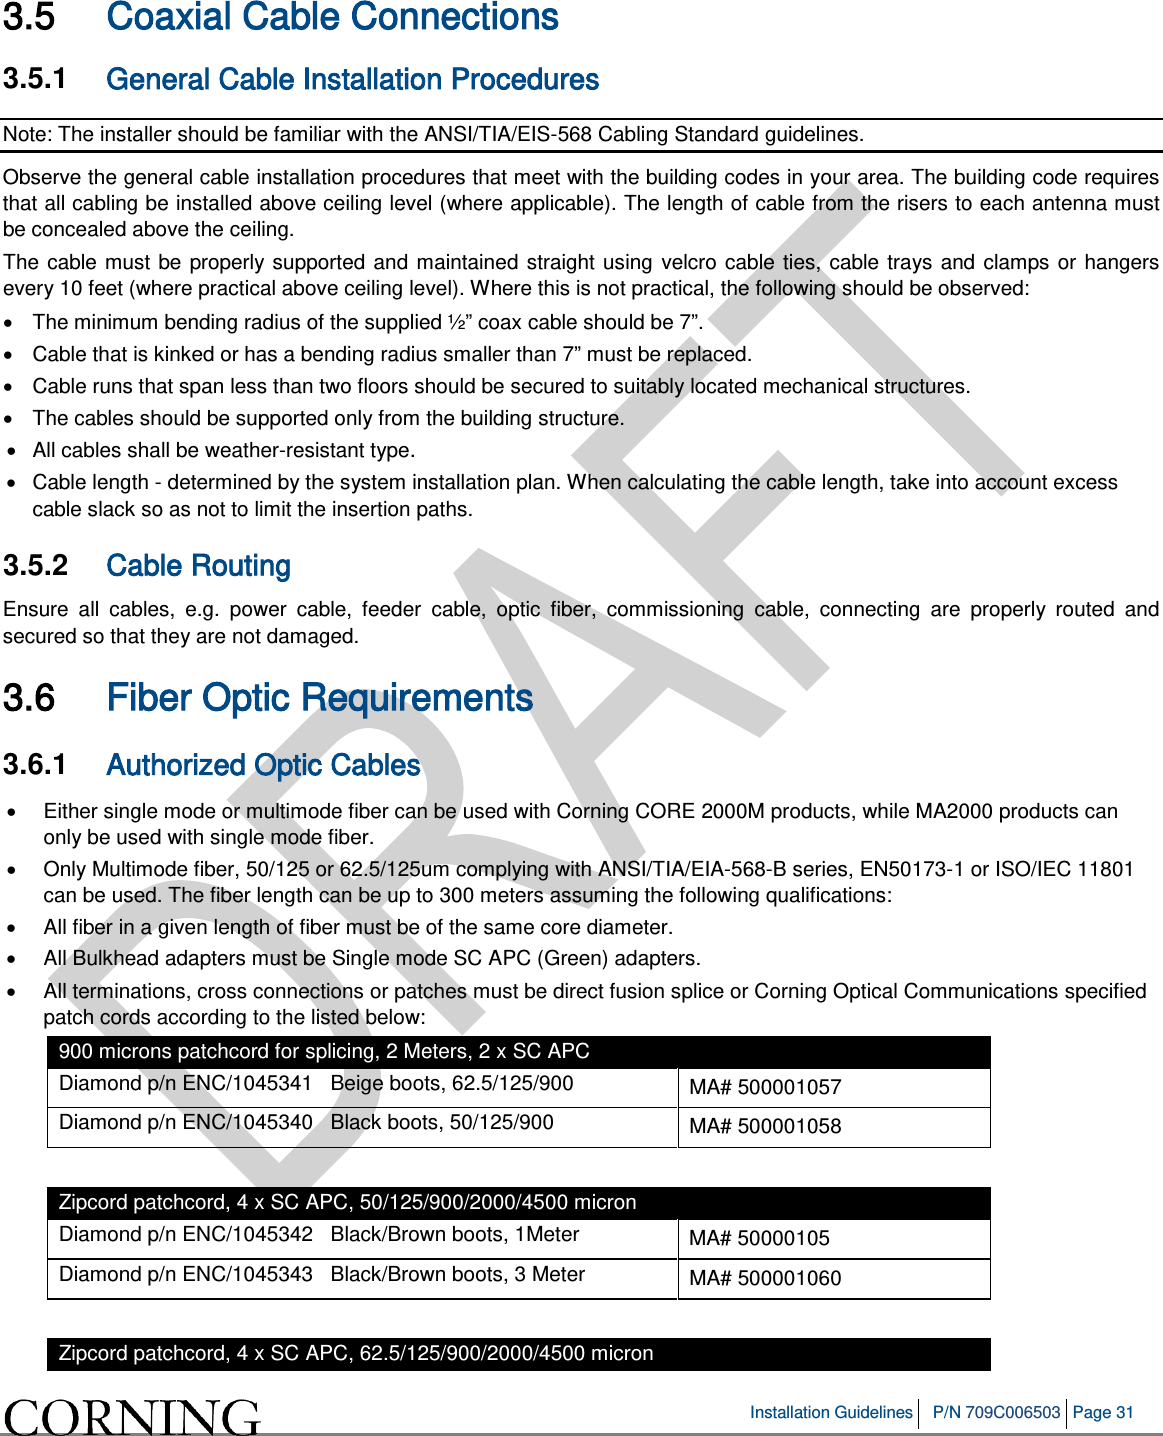   Installation Guidelines P/N 709C006503 Page 31   3.5 Coaxial Cable Connections 3.5.1  General Cable Installation Procedures Note: The installer should be familiar with the ANSI/TIA/EIS-568 Cabling Standard guidelines.  Observe the general cable installation procedures that meet with the building codes in your area. The building code requires that all cabling be installed above ceiling level (where applicable). The length of cable from the risers to each antenna must be concealed above the ceiling.  The cable must be properly supported and maintained straight using velcro cable ties, cable trays and clamps or hangers every 10 feet (where practical above ceiling level). Where this is not practical, the following should be observed: • The minimum bending radius of the supplied ½” coax cable should be 7”. • Cable that is kinked or has a bending radius smaller than 7” must be replaced. • Cable runs that span less than two floors should be secured to suitably located mechanical structures. • The cables should be supported only from the building structure. • All cables shall be weather-resistant type. • Cable length - determined by the system installation plan. When calculating the cable length, take into account excess cable slack so as not to limit the insertion paths. 3.5.2  Cable Routing  Ensure all cables, e.g. power cable, feeder cable, optic fiber, commissioning cable, connecting are properly routed and secured so that they are not damaged. 3.6 Fiber Optic Requirements 3.6.1  Authorized Optic Cables • Either single mode or multimode fiber can be used with Corning CORE 2000M products, while MA2000 products can only be used with single mode fiber. • Only Multimode fiber, 50/125 or 62.5/125um complying with ANSI/TIA/EIA-568-B series, EN50173-1 or ISO/IEC 11801 can be used. The fiber length can be up to 300 meters assuming the following qualifications: • All fiber in a given length of fiber must be of the same core diameter.  • All Bulkhead adapters must be Single mode SC APC (Green) adapters.  • All terminations, cross connections or patches must be direct fusion splice or Corning Optical Communications specified patch cords according to the listed below:  900 microns patchcord for splicing, 2 Meters, 2 x SC APC Diamond p/n ENC/1045341   Beige boots, 62.5/125/900 MA# 500001057 Diamond p/n ENC/1045340   Black boots, 50/125/900 MA# 500001058  Zipcord patchcord, 4 x SC APC, 50/125/900/2000/4500 micron Diamond p/n ENC/1045342   Black/Brown boots, 1Meter MA# 50000105 Diamond p/n ENC/1045343   Black/Brown boots, 3 Meter MA# 500001060  Zipcord patchcord, 4 x SC APC, 62.5/125/900/2000/4500 micron 